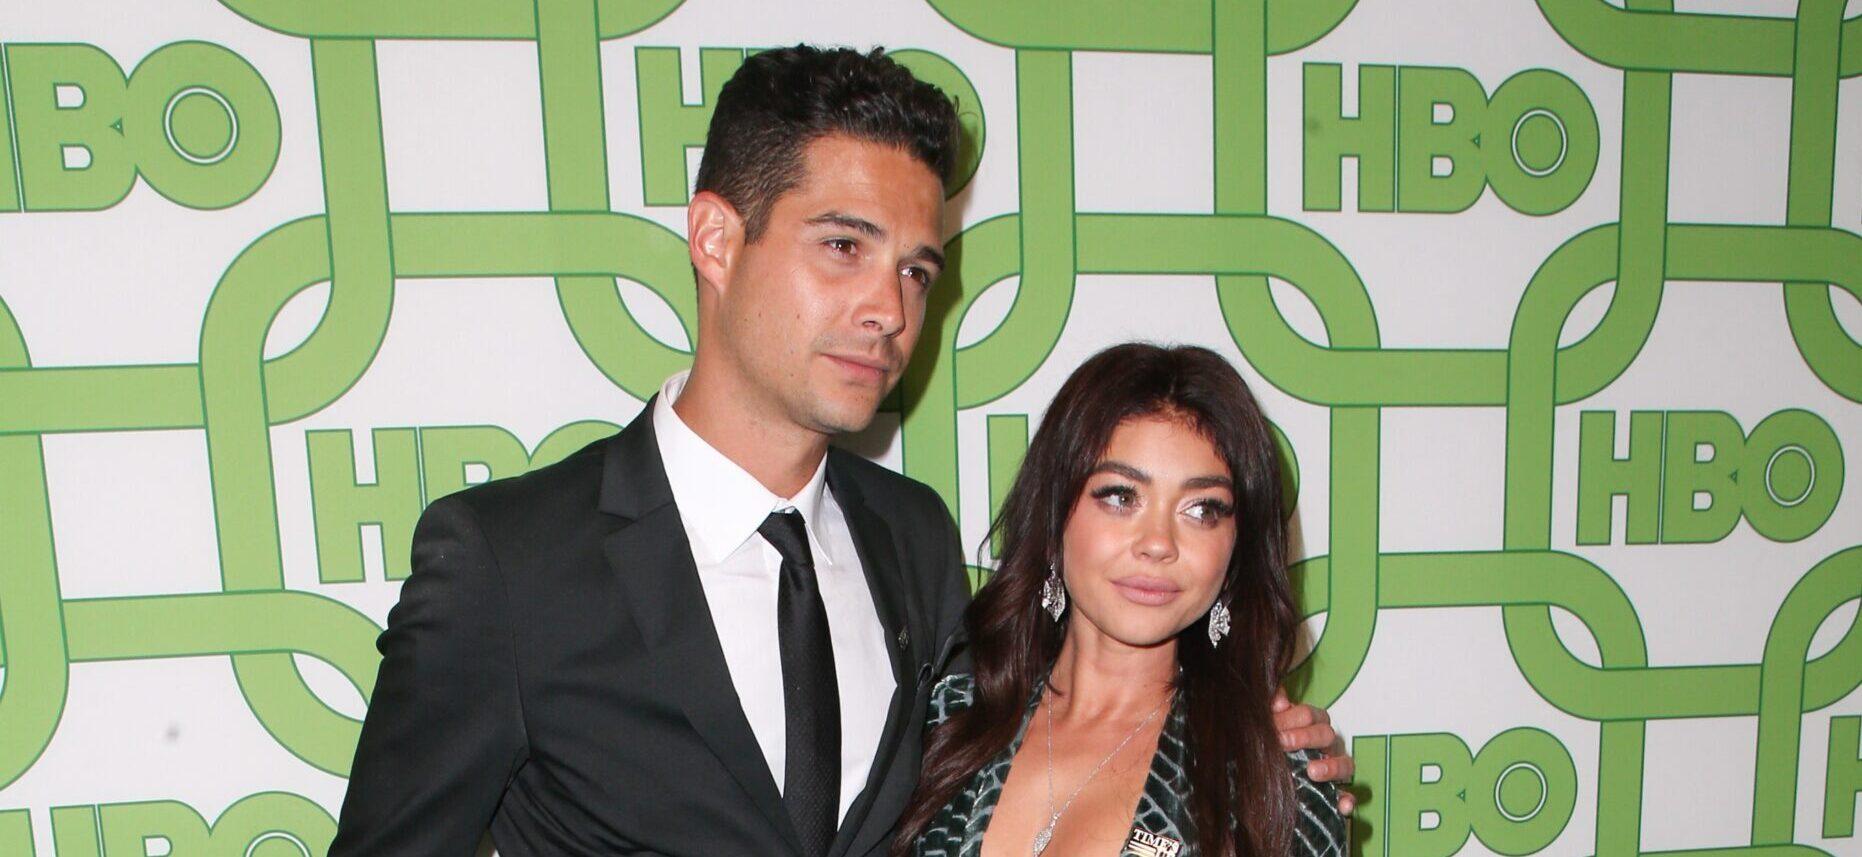 Wells Adams Can’t Keep Hands Off ‘Bombshell’ Sarah Hyland In Steamy Photo At Love Island’s ‘Casa Amor’